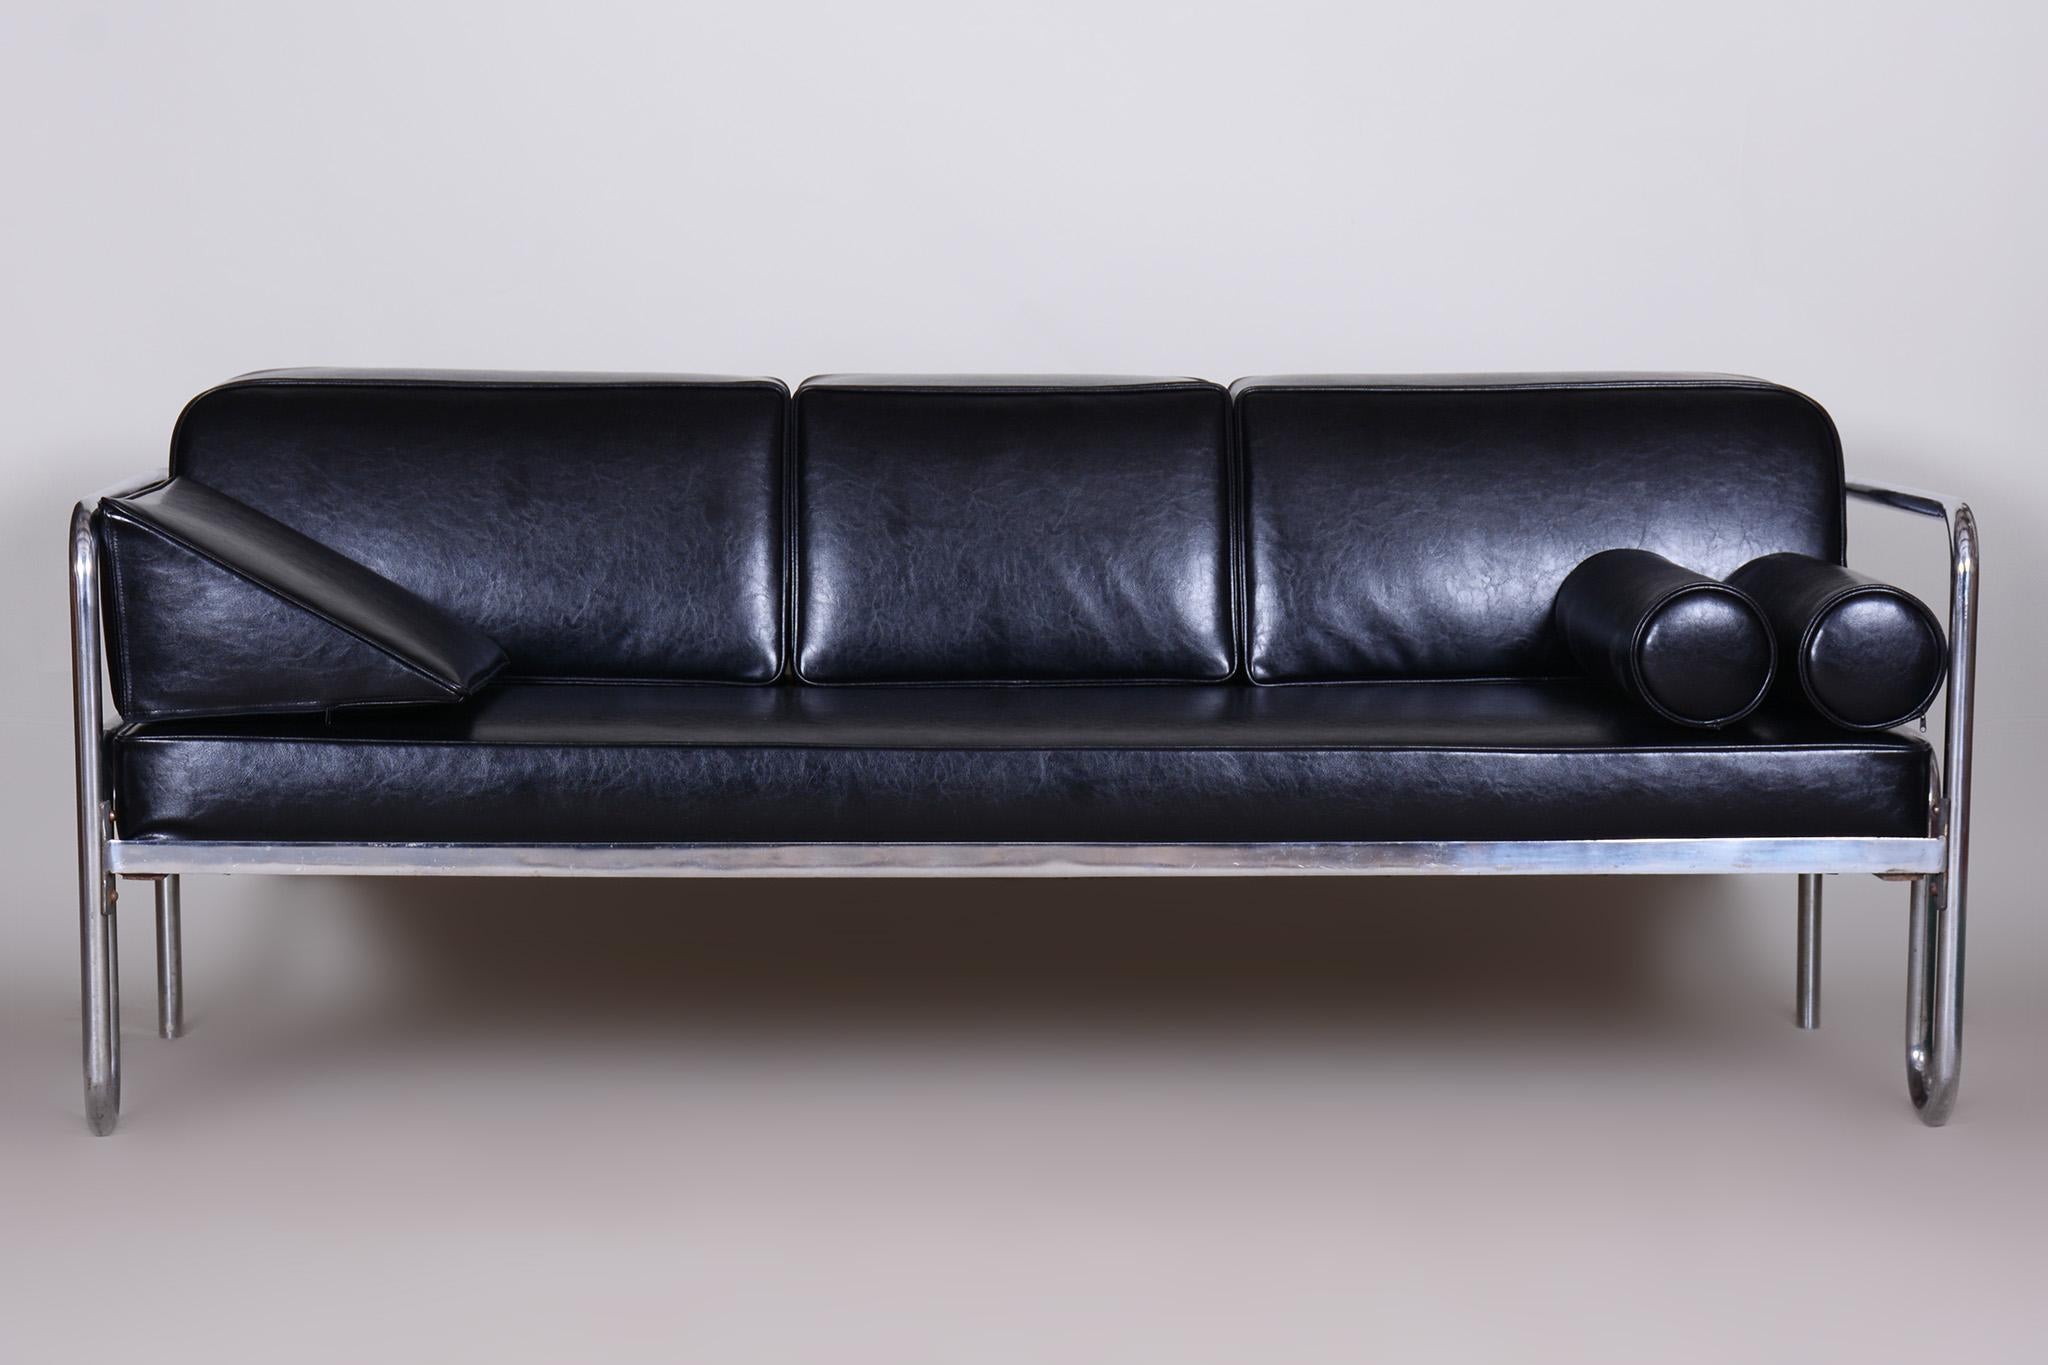 Czech Restored Black Bauhaus Sofa, High-Quality Leather, Chrome-Plated Steel, 1930s For Sale